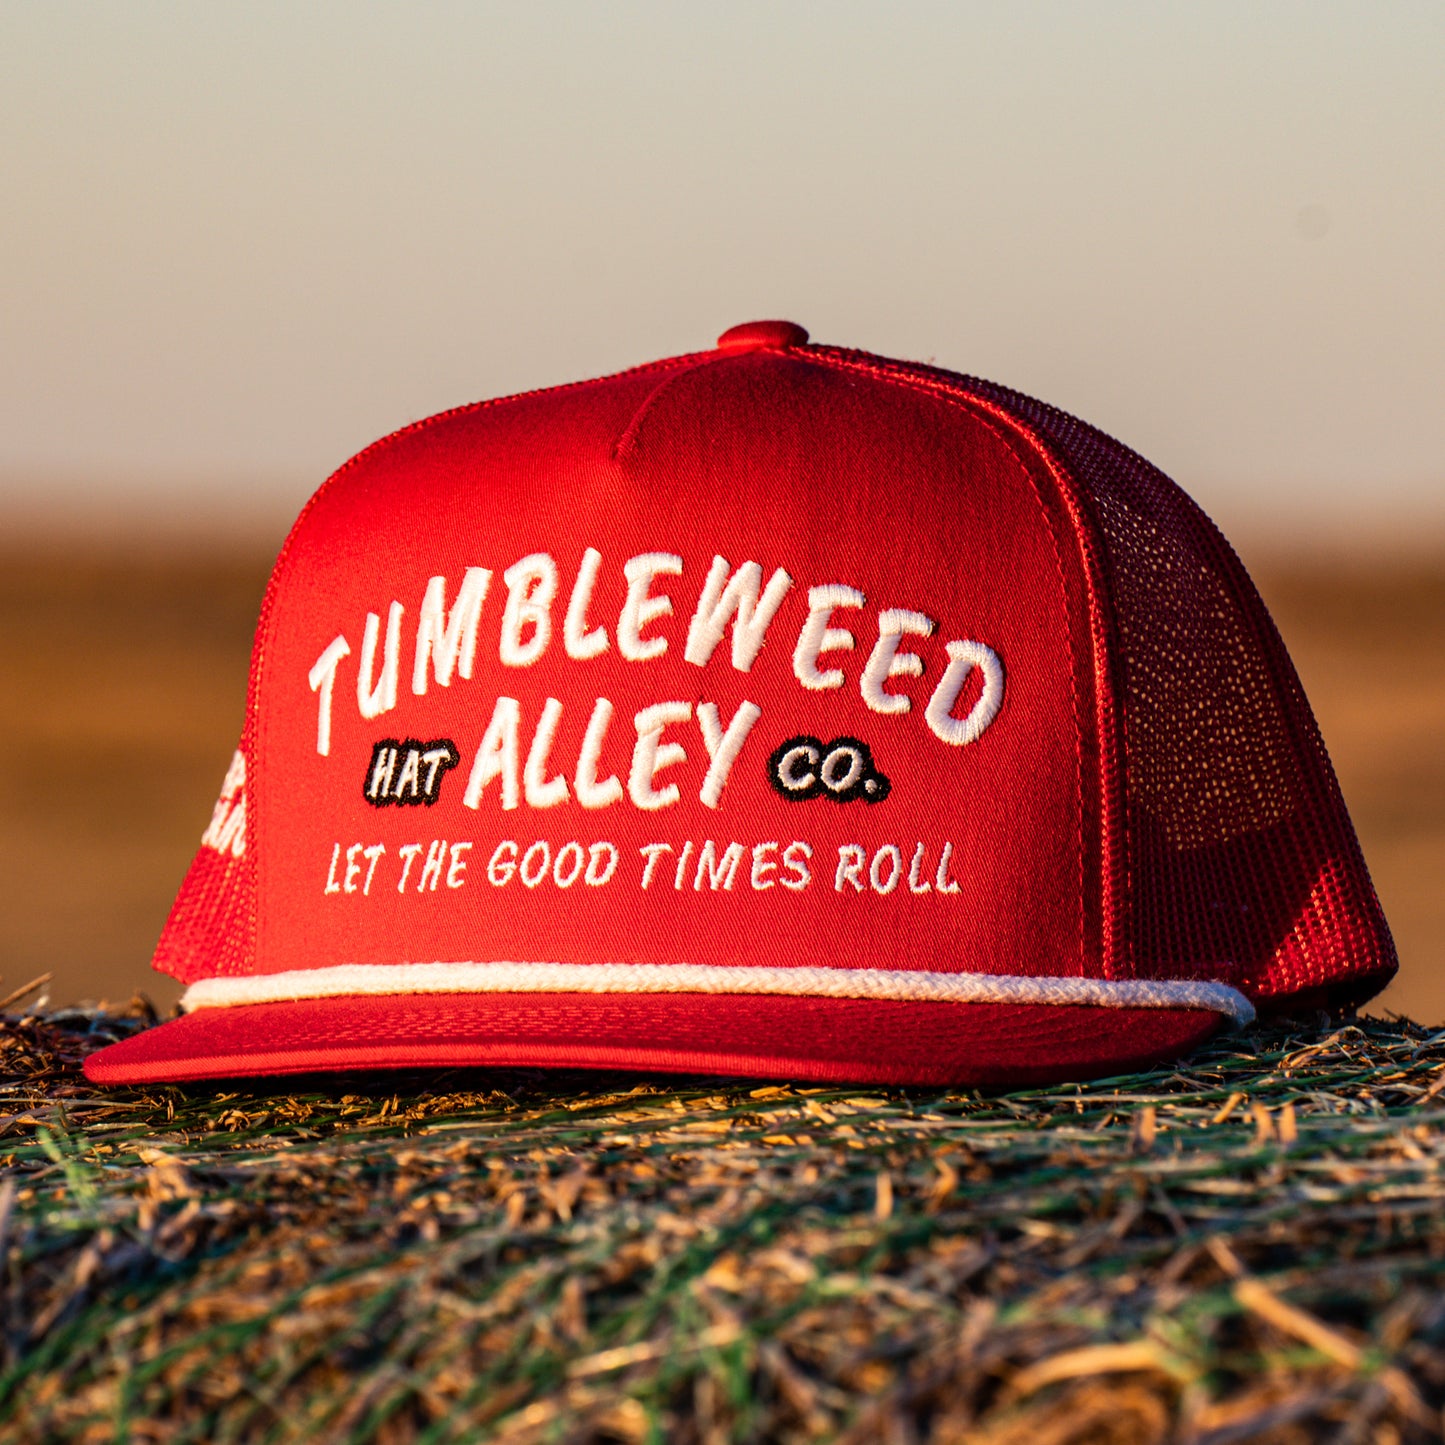 Let the Good Times Roll - Red